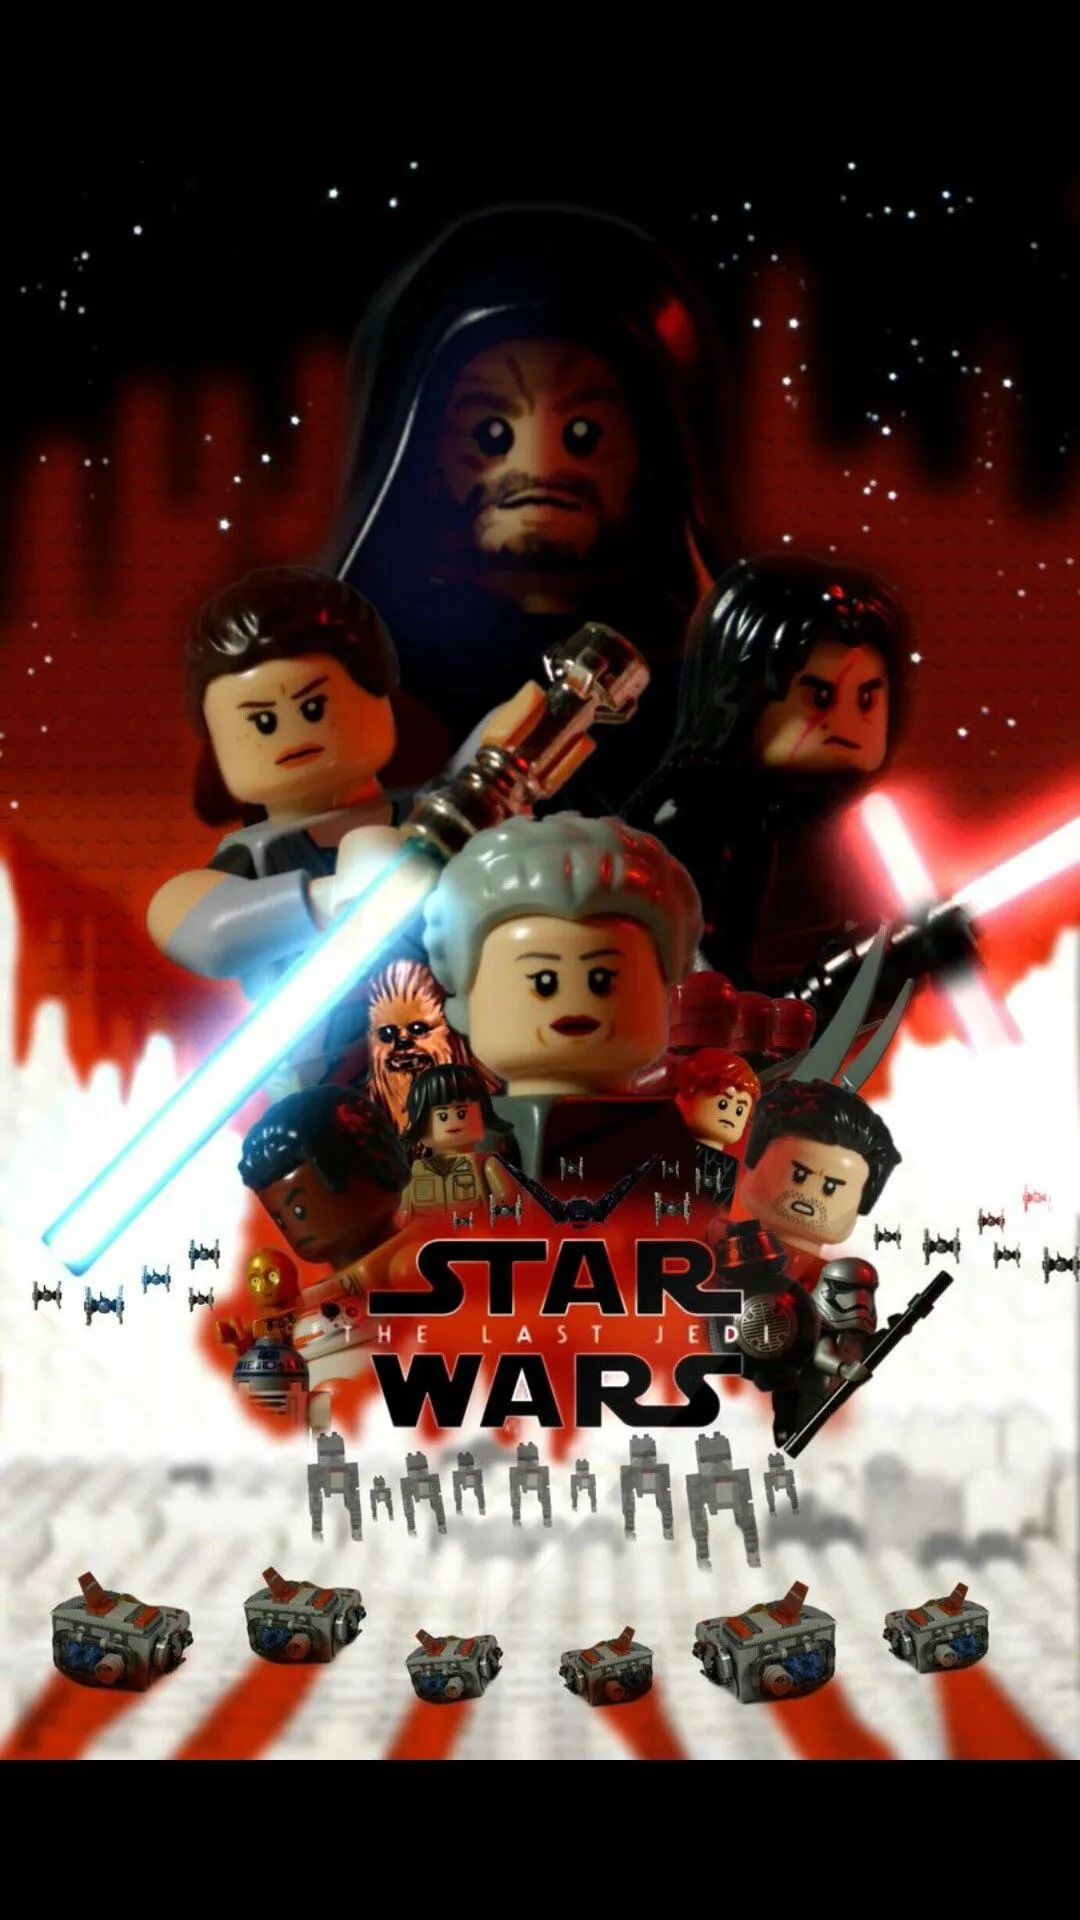 Lego Star Wars Iphone Wallpapers